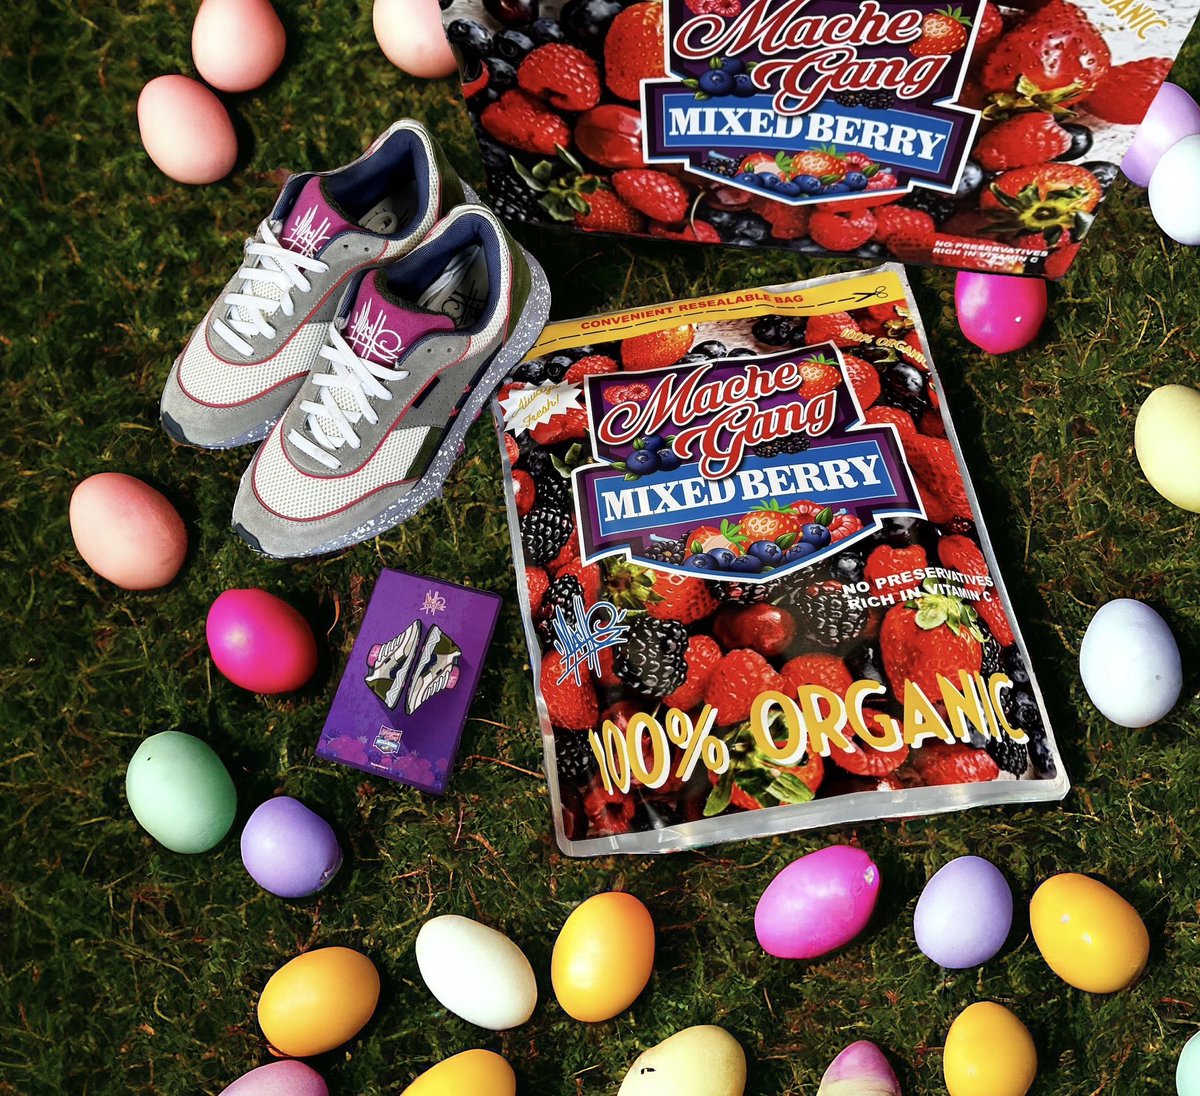 Happy Easter guys, not sure if the bunny left you guys anything good today but hey at least you have until 11am tomorrow morning to secure your pair of the “Mixed Berry” runners. All pairs include the special packaging pictured (minus the eggs lol) Link: machecustoms.mybigcommerce.com/mixed-berry-ma…